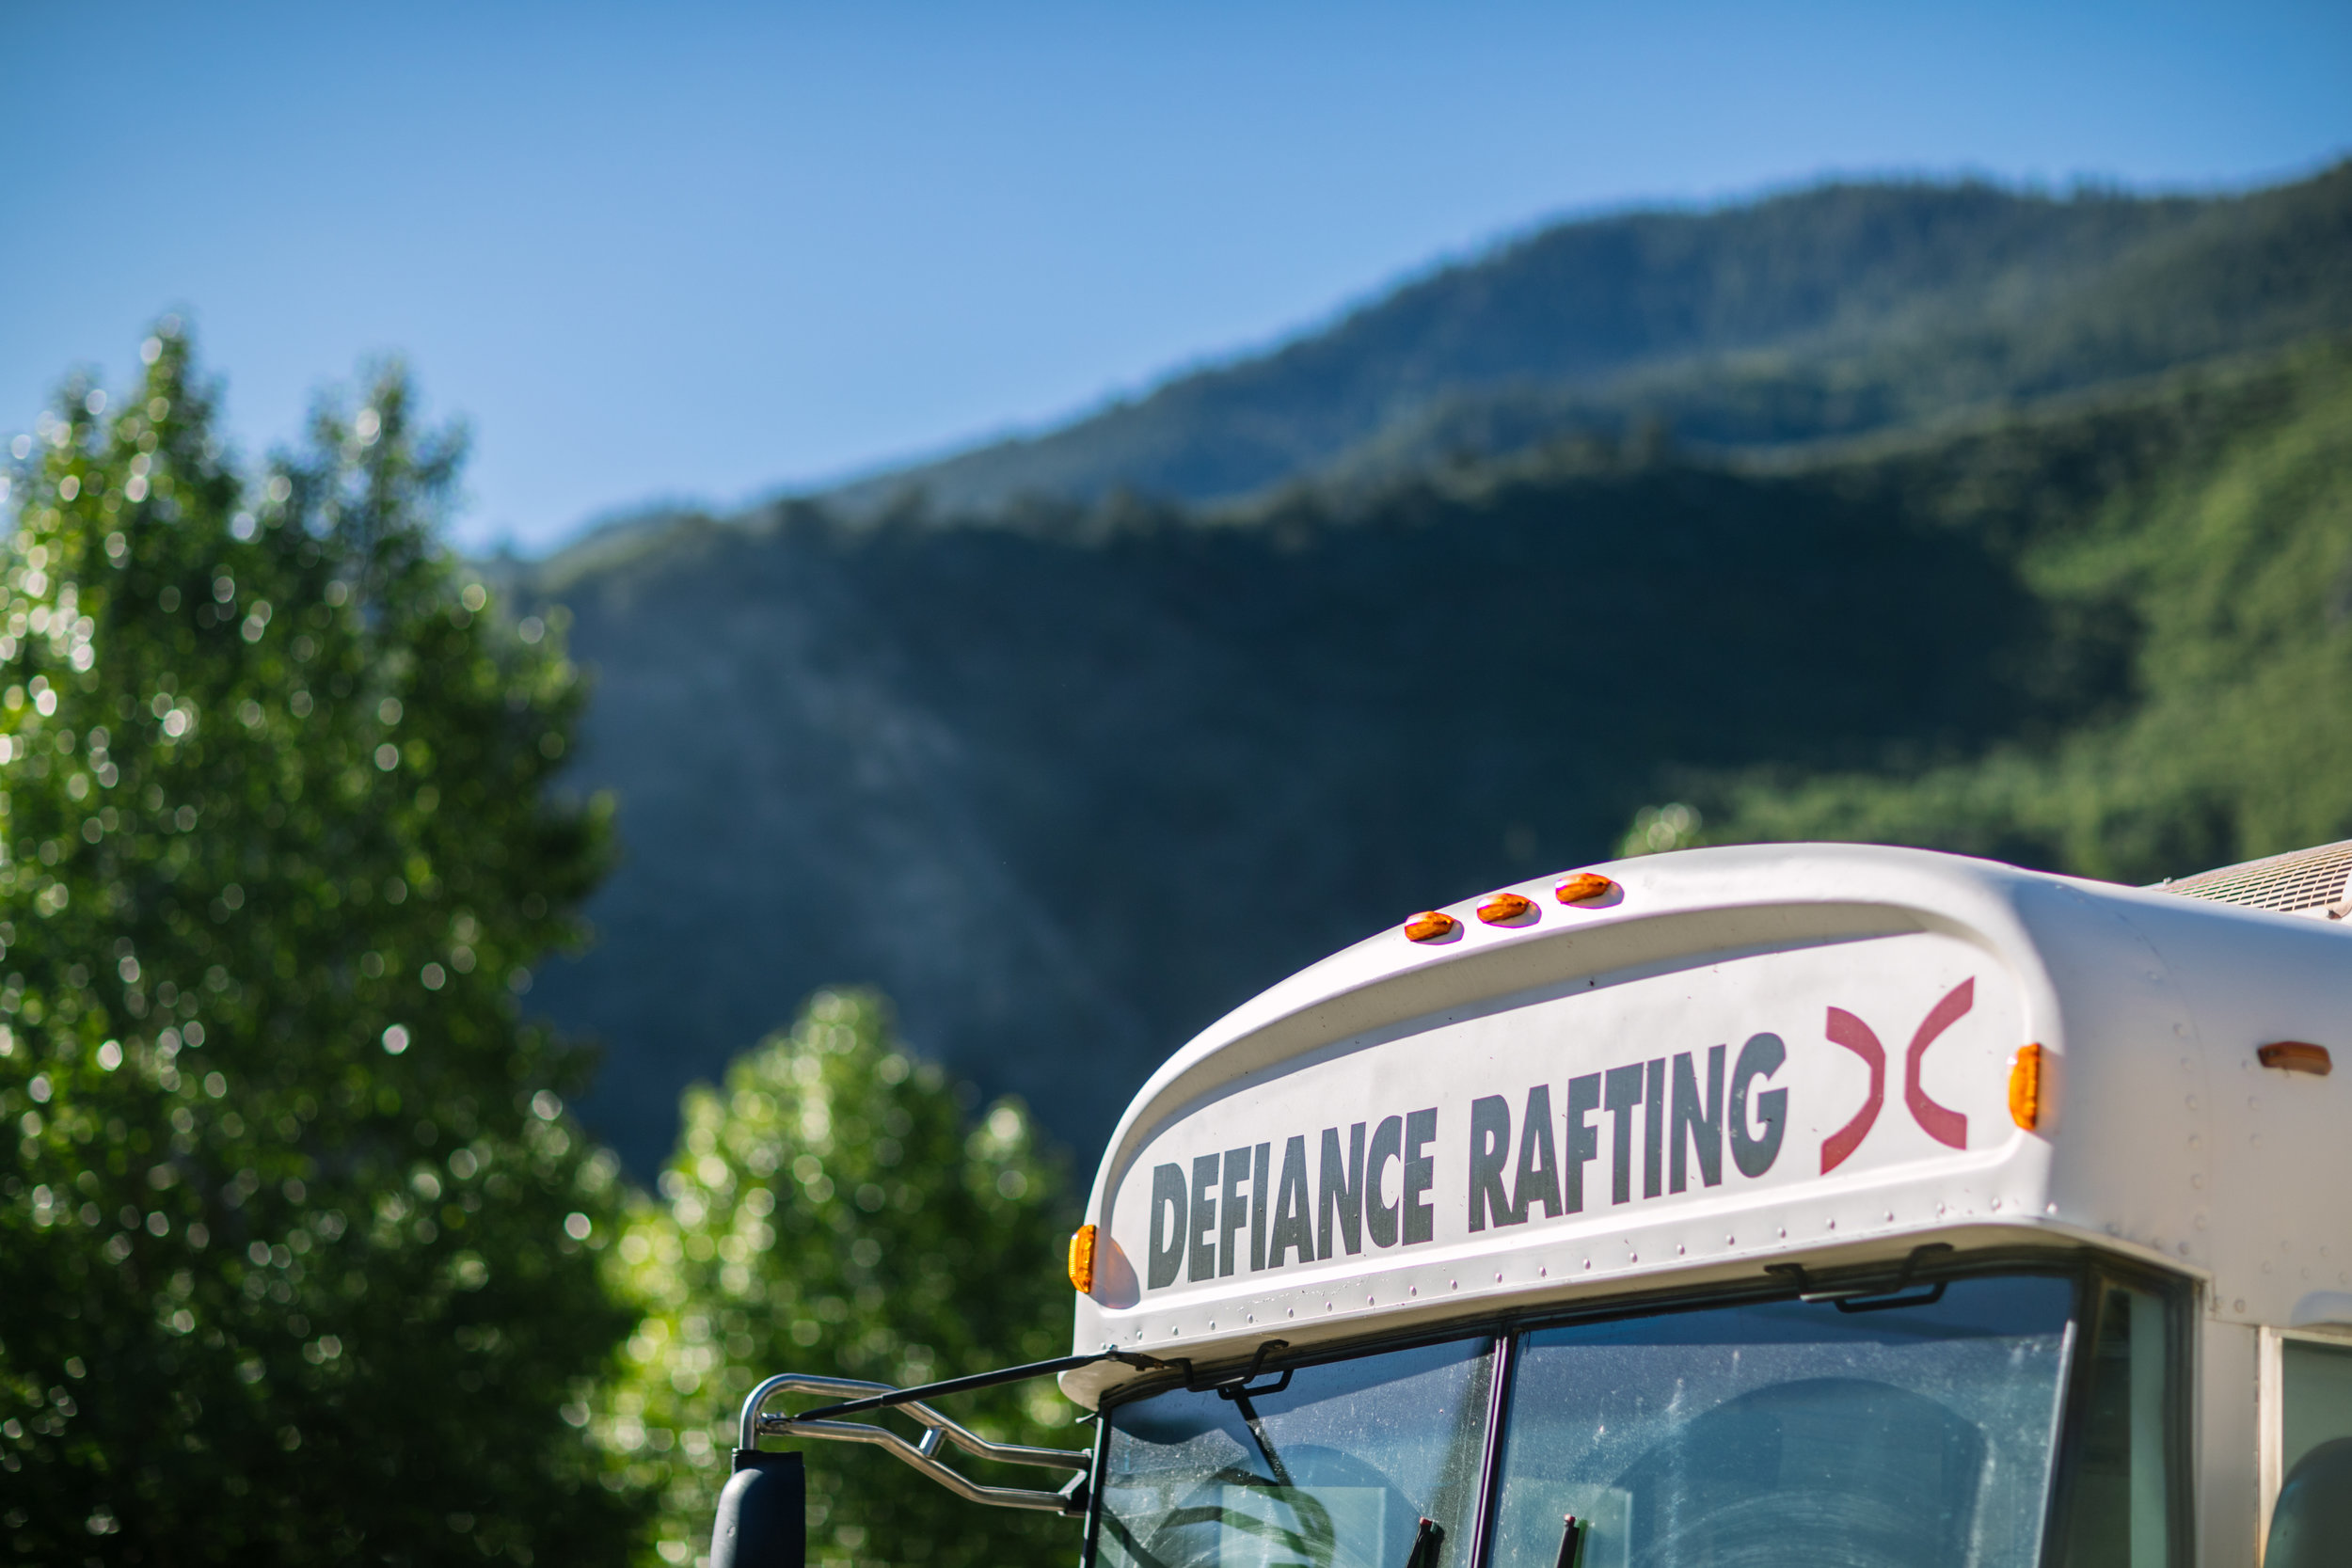 Defiance Rafting bus to the river